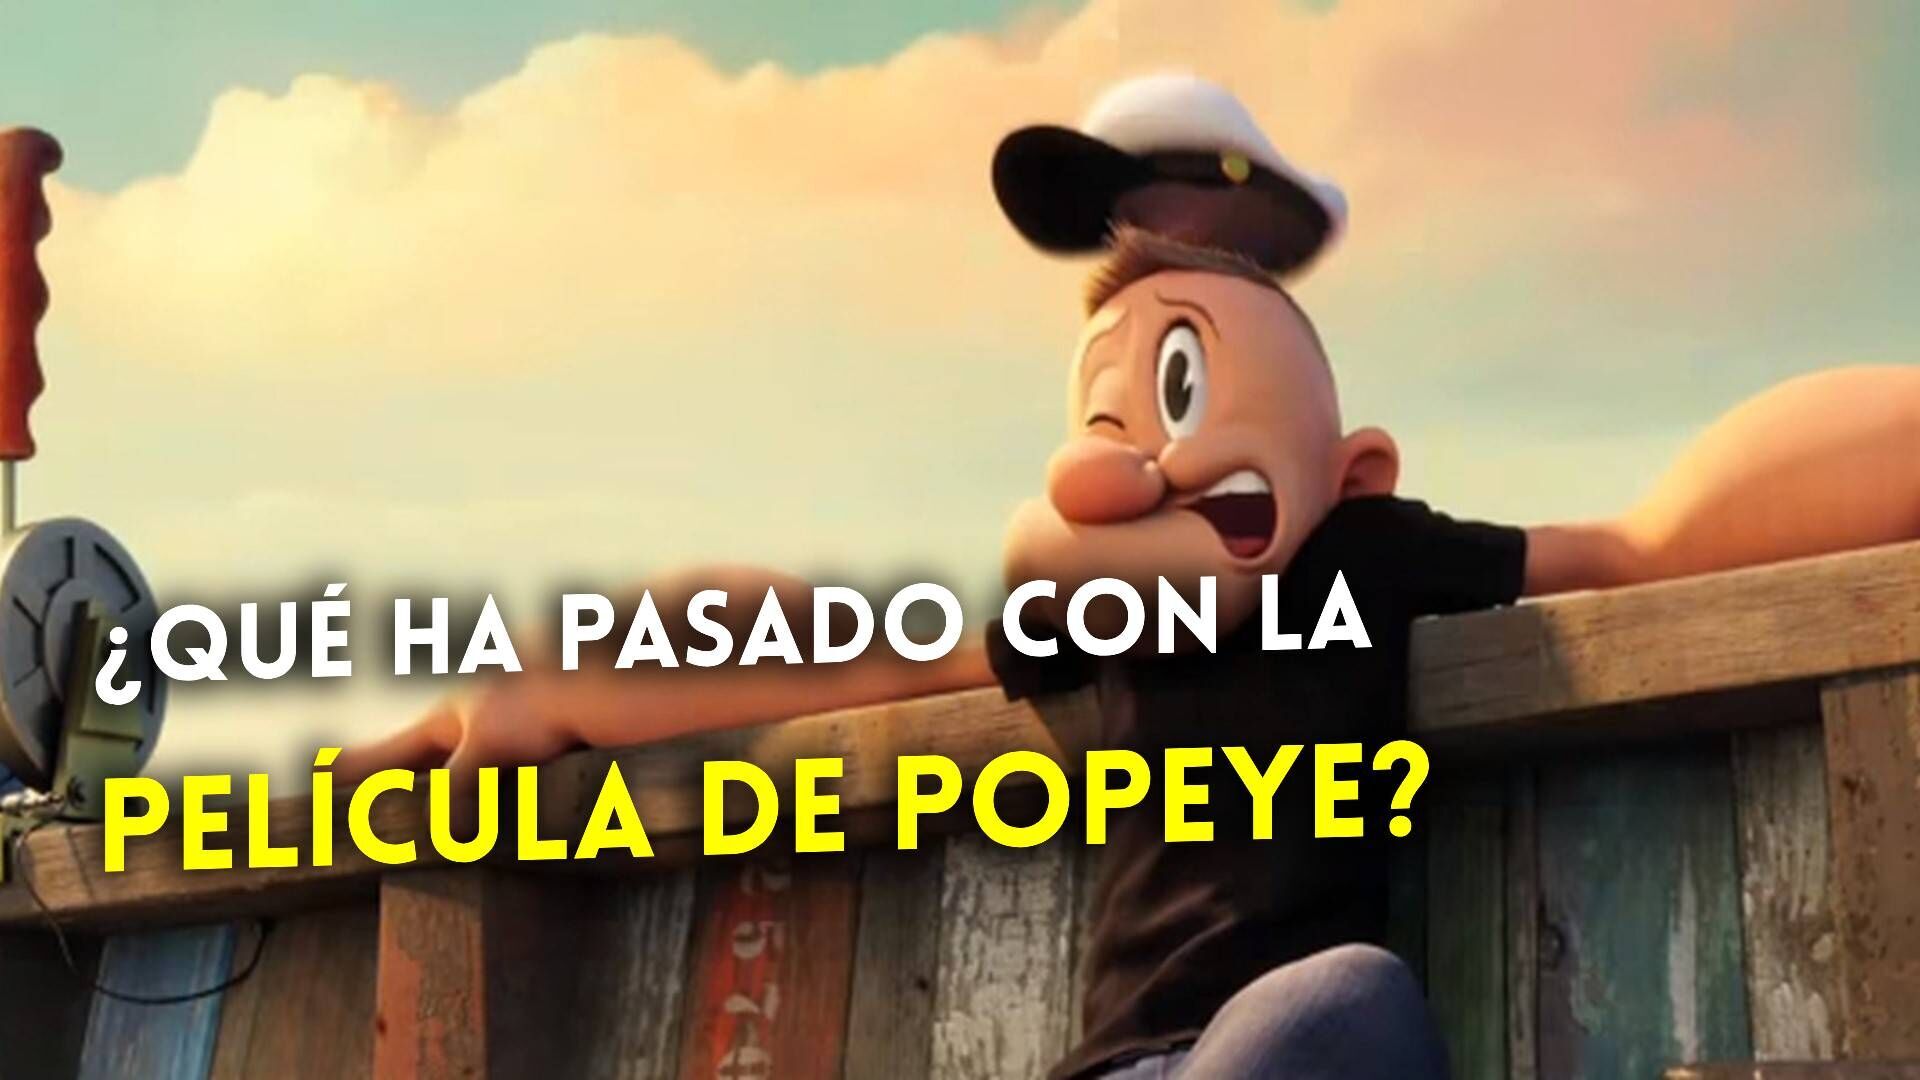 Cancelled popeye movie leaked